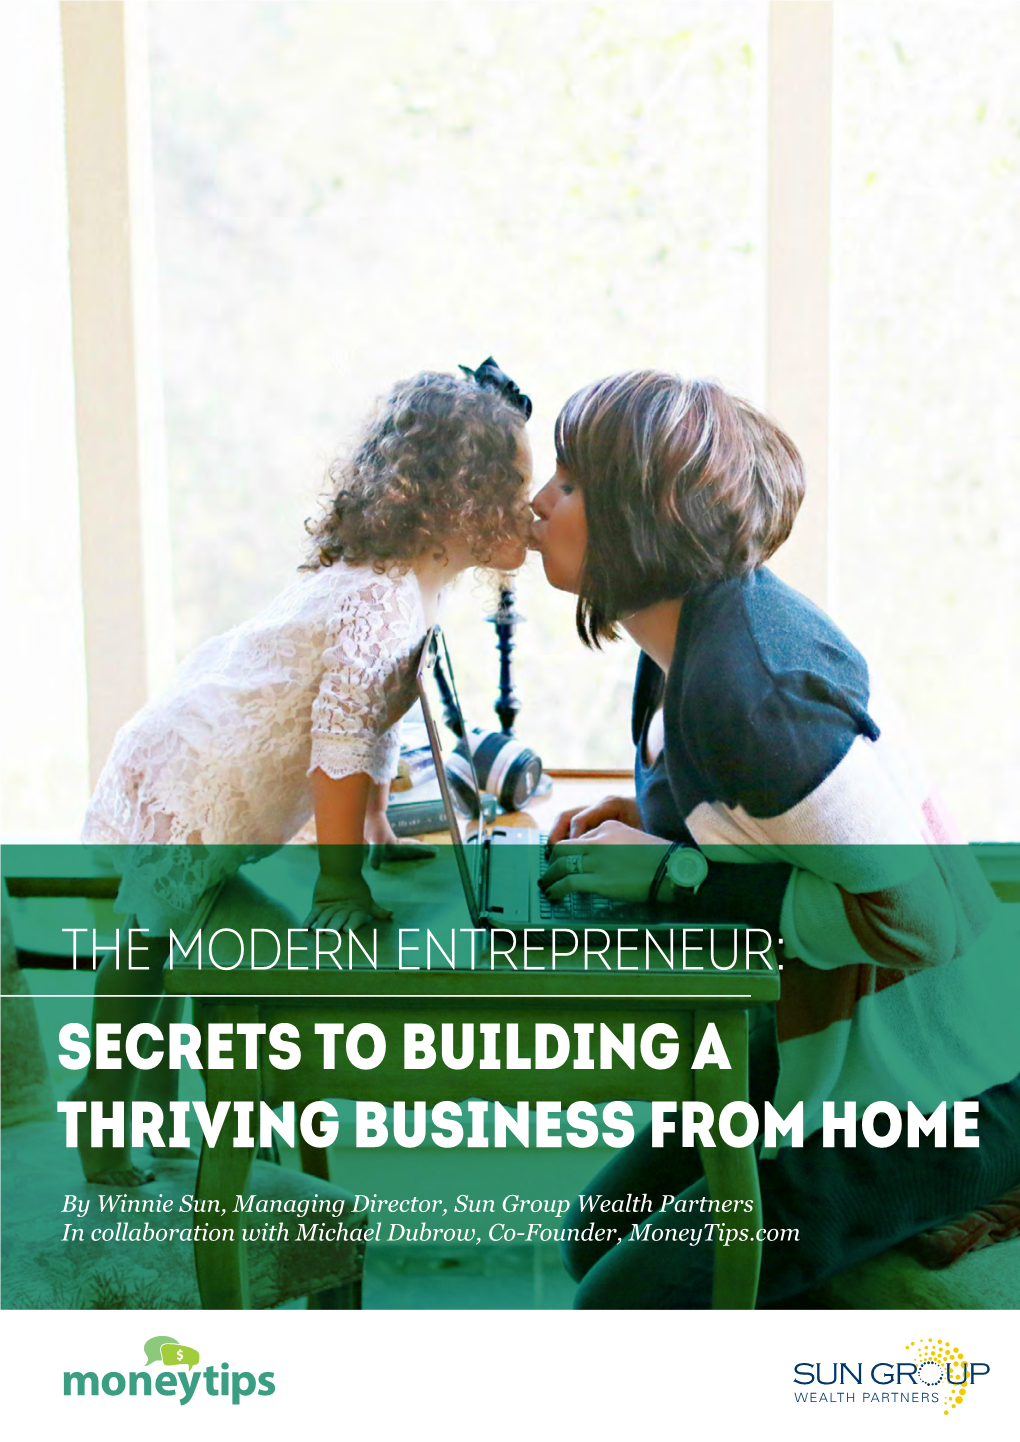 Secrets to Building a Thriving Business from Home Is Provided for General Information Purposes Only and Does Not Constitute Investment Or Professional Advice